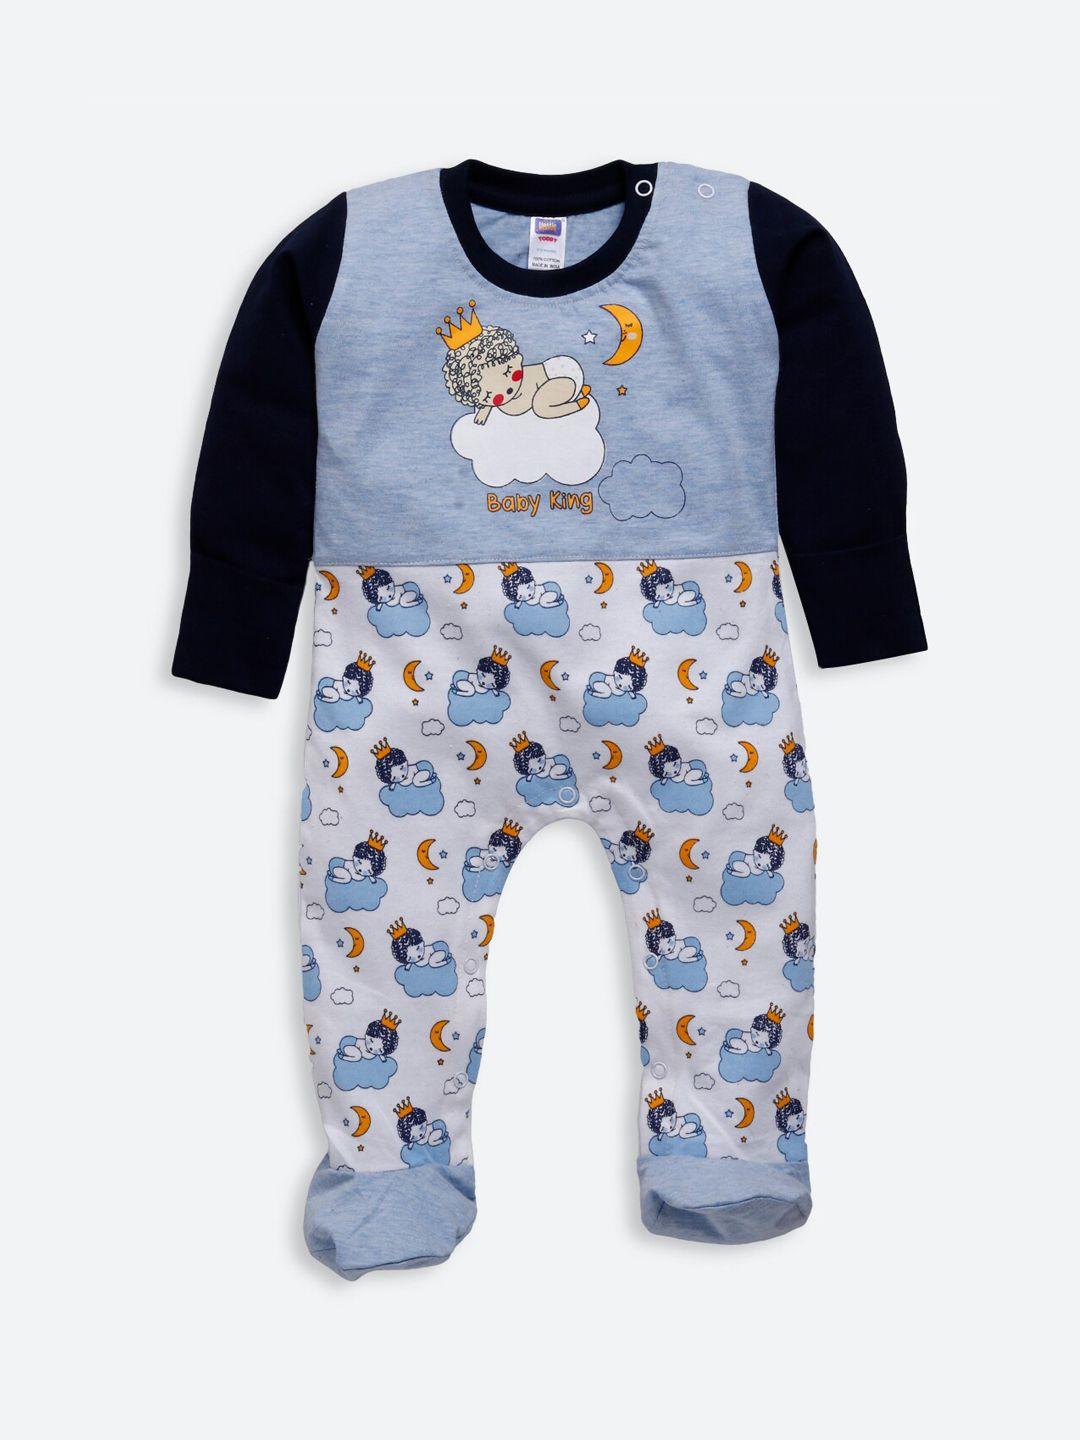 nottie-planet-kids-blue-&-white-printed-cotton-rompers